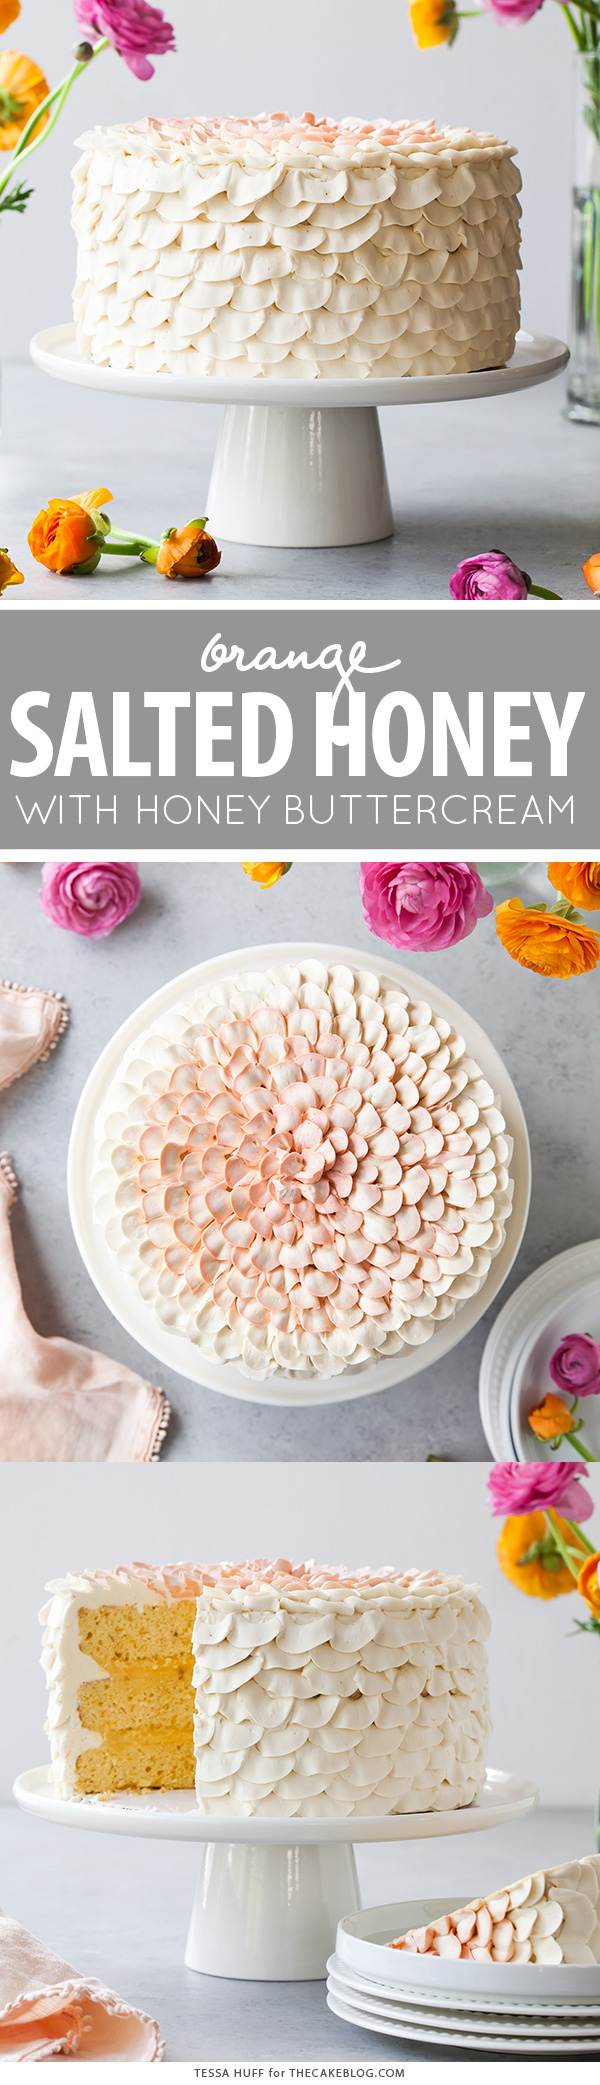 Orange Salted Honey Cake - orange cake with a salted honey custard and a piped petal honey buttercream |  by Tessa Huff for TheCakeBlog.com